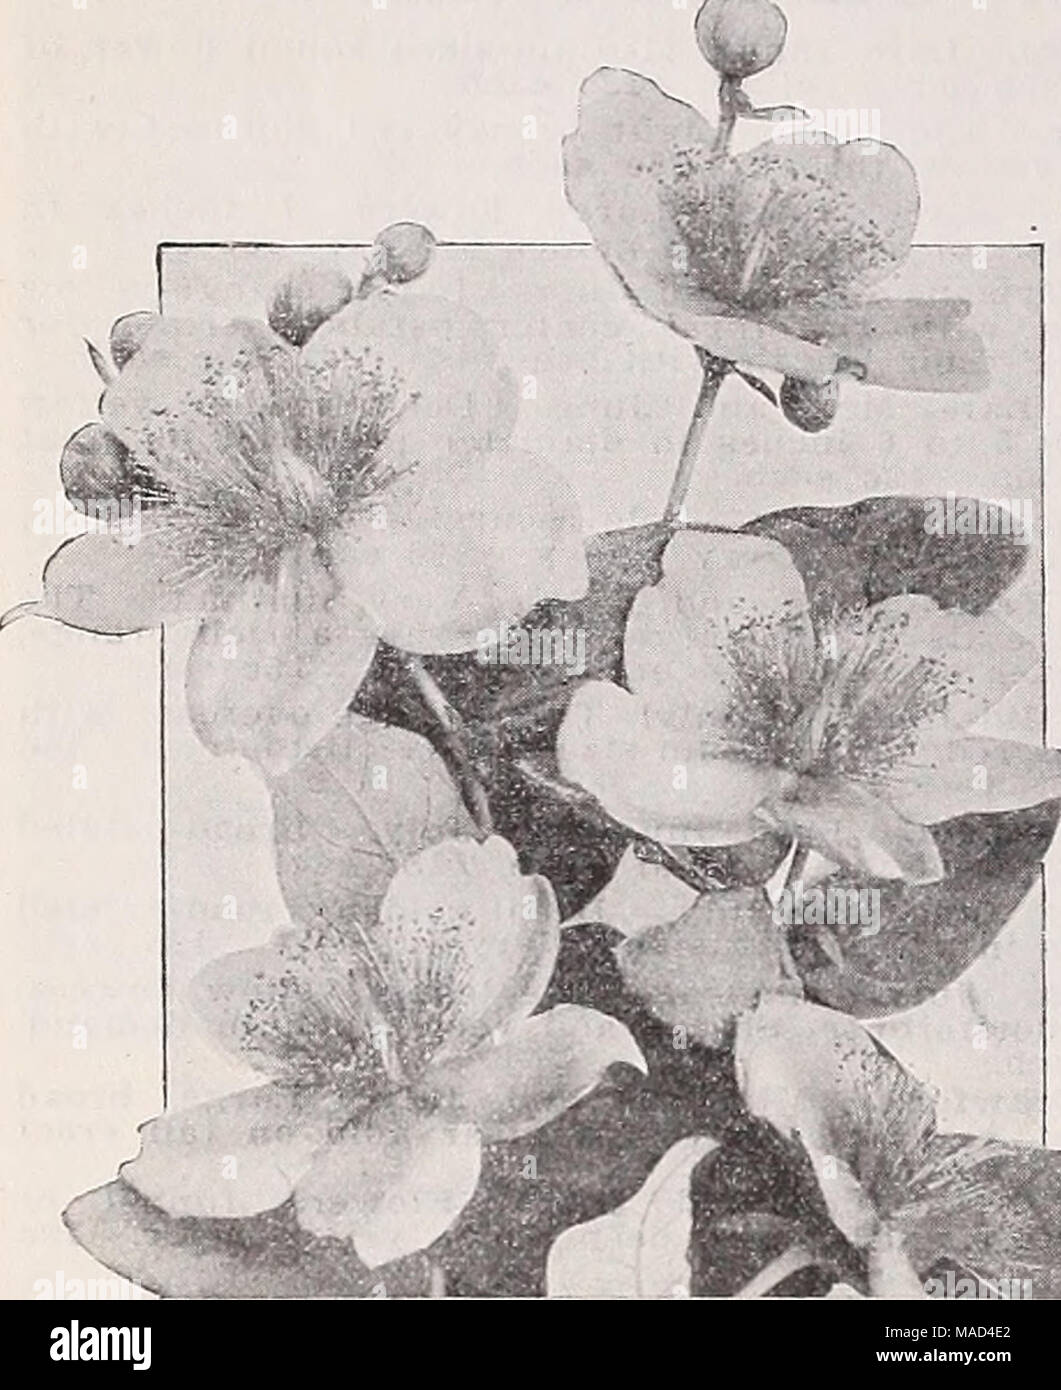 . Dreer's wholesale catalog for florists and market gardeners : 1940 winter spring summer . Hypericum—St. John's Wort Hypericum—St. John's Wort Per doz. Per 100 Moserianum. Strong one-year-old $3 00 $20 00 Iberis—Hardy Candytuft Sempervlrens. 3-inch pots 2 50 15 00 — Iilttle Gem. 3-inch pots 2 50 15 00 Iris pumila hybrida Among the earliest flowering and very showy, grow- ing from 10 to 12 inches high. Cyanea. Rich royal purple with blackish shadings. Excelsa. Pale lemon yellow. Schneeknppe. Pure white. Any of the above: $1.50 per doz.; 910.00 per 100. Stock Photo